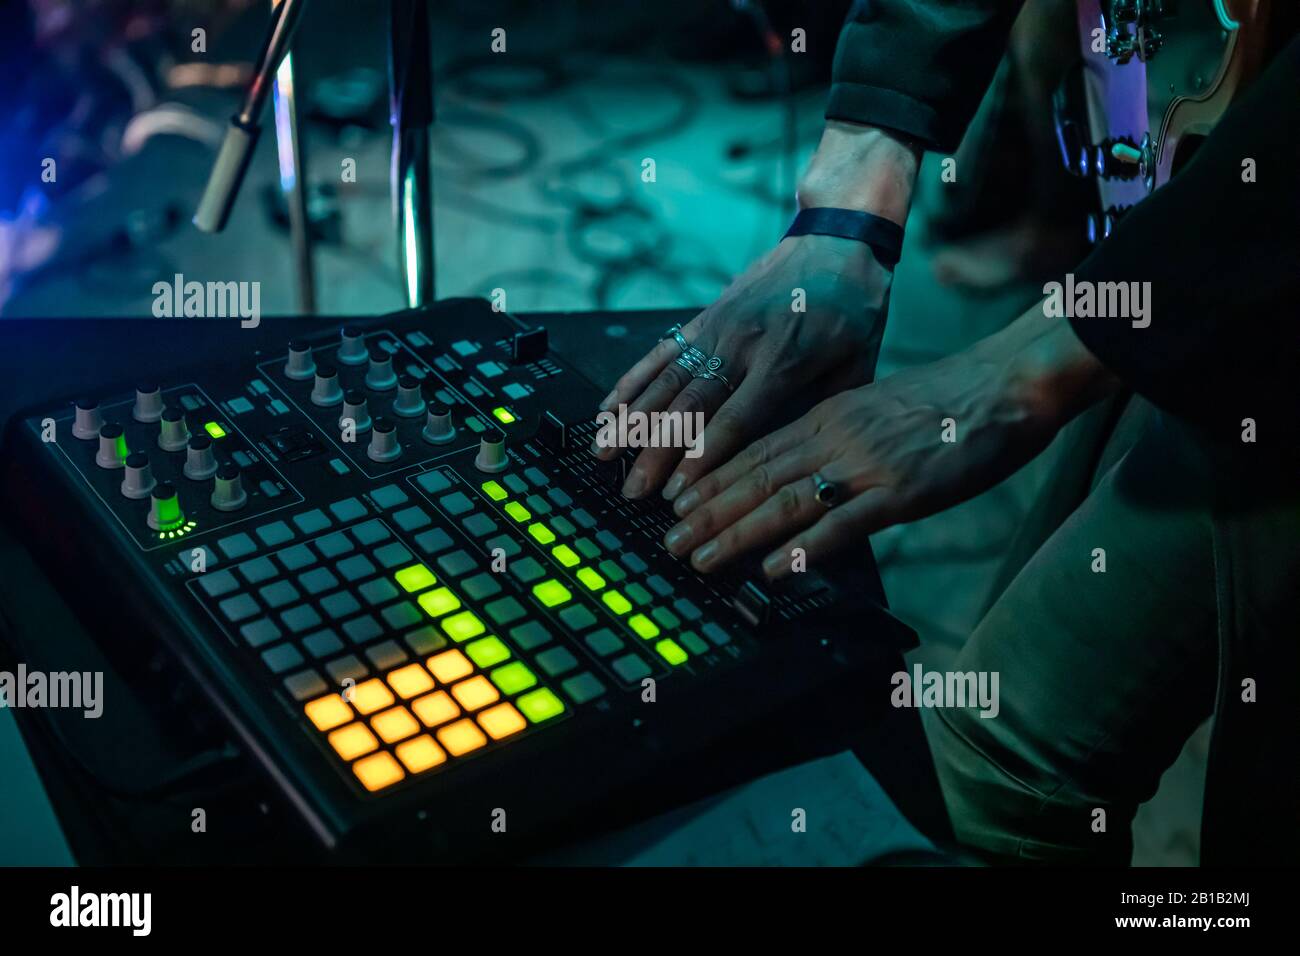 A Closeup And High Angle On The Hands Of An Electronic Music